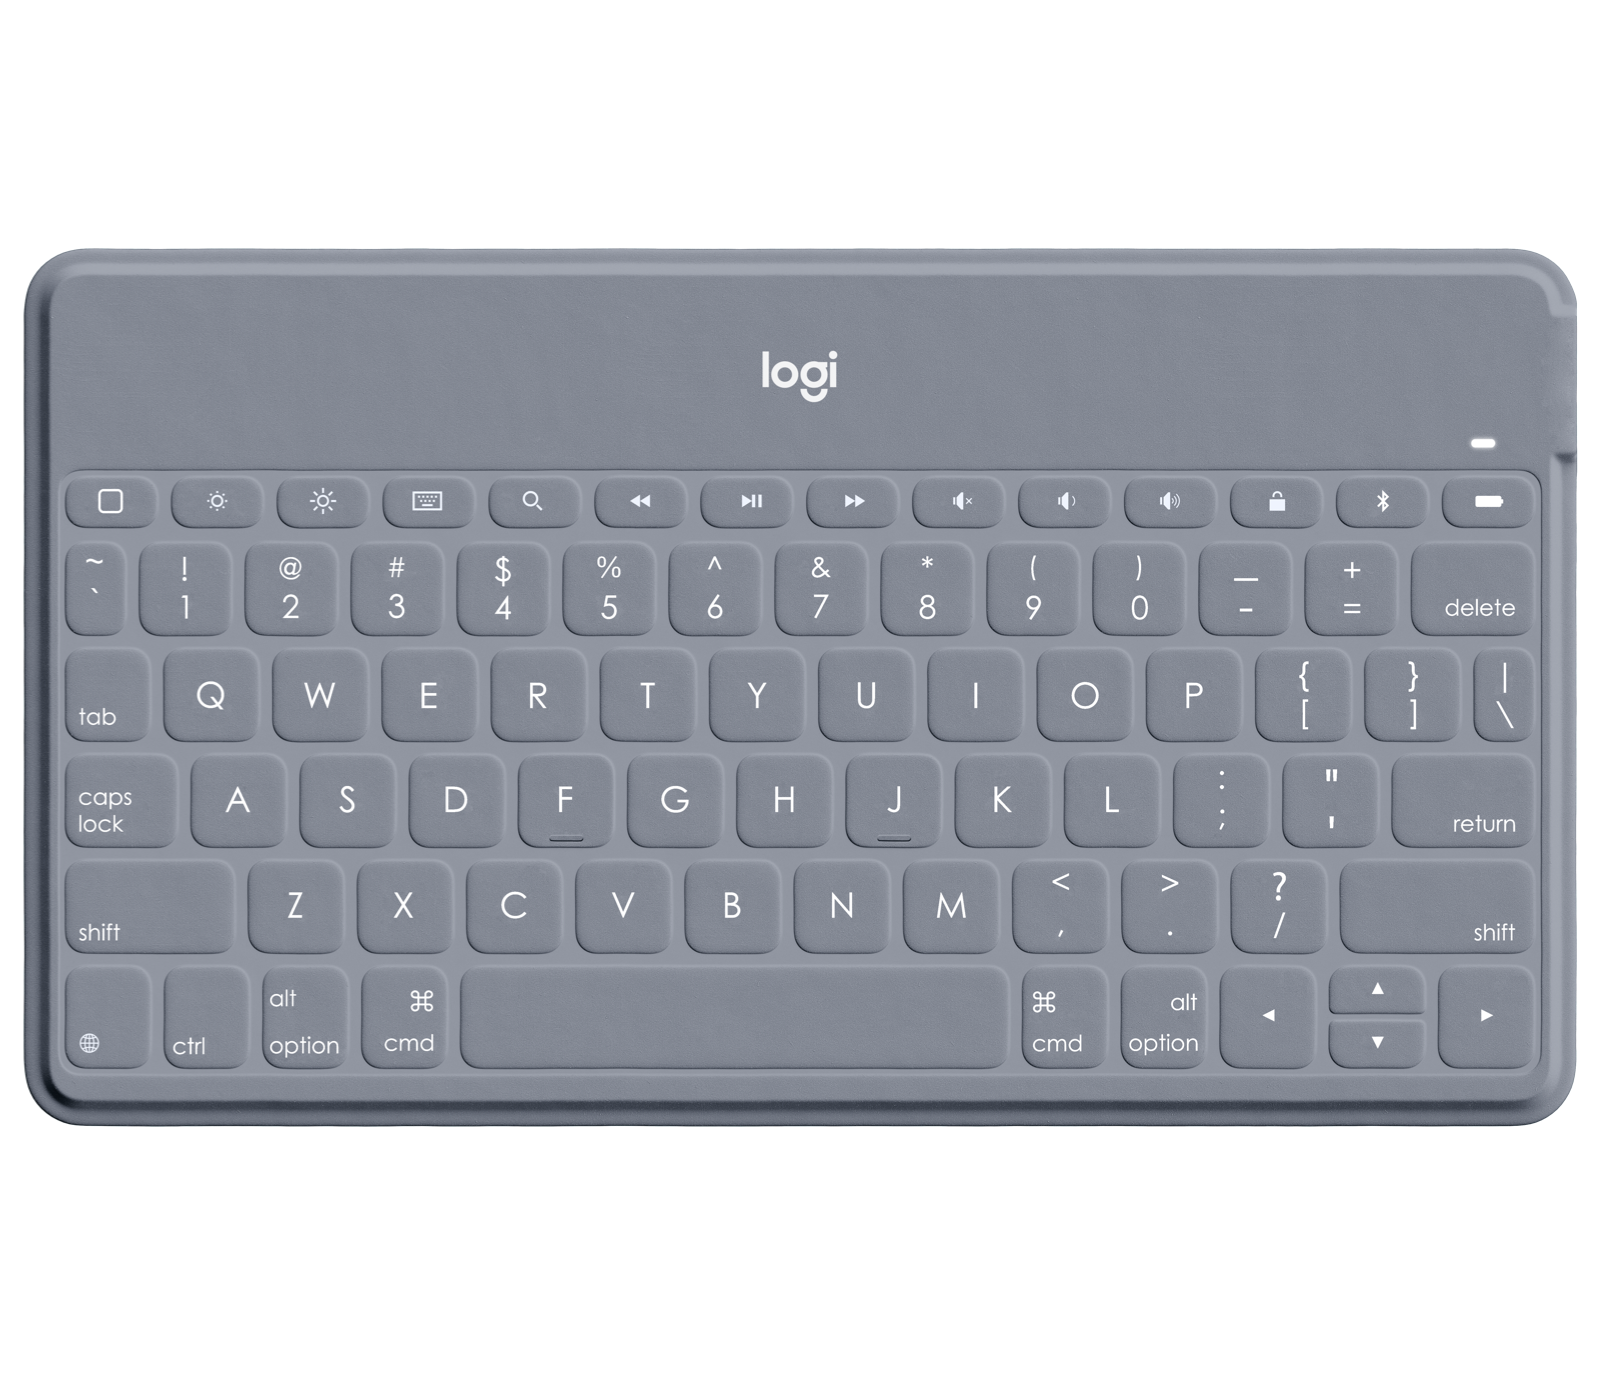 Keys-to-Go Portable Keyboard for Apple Devices